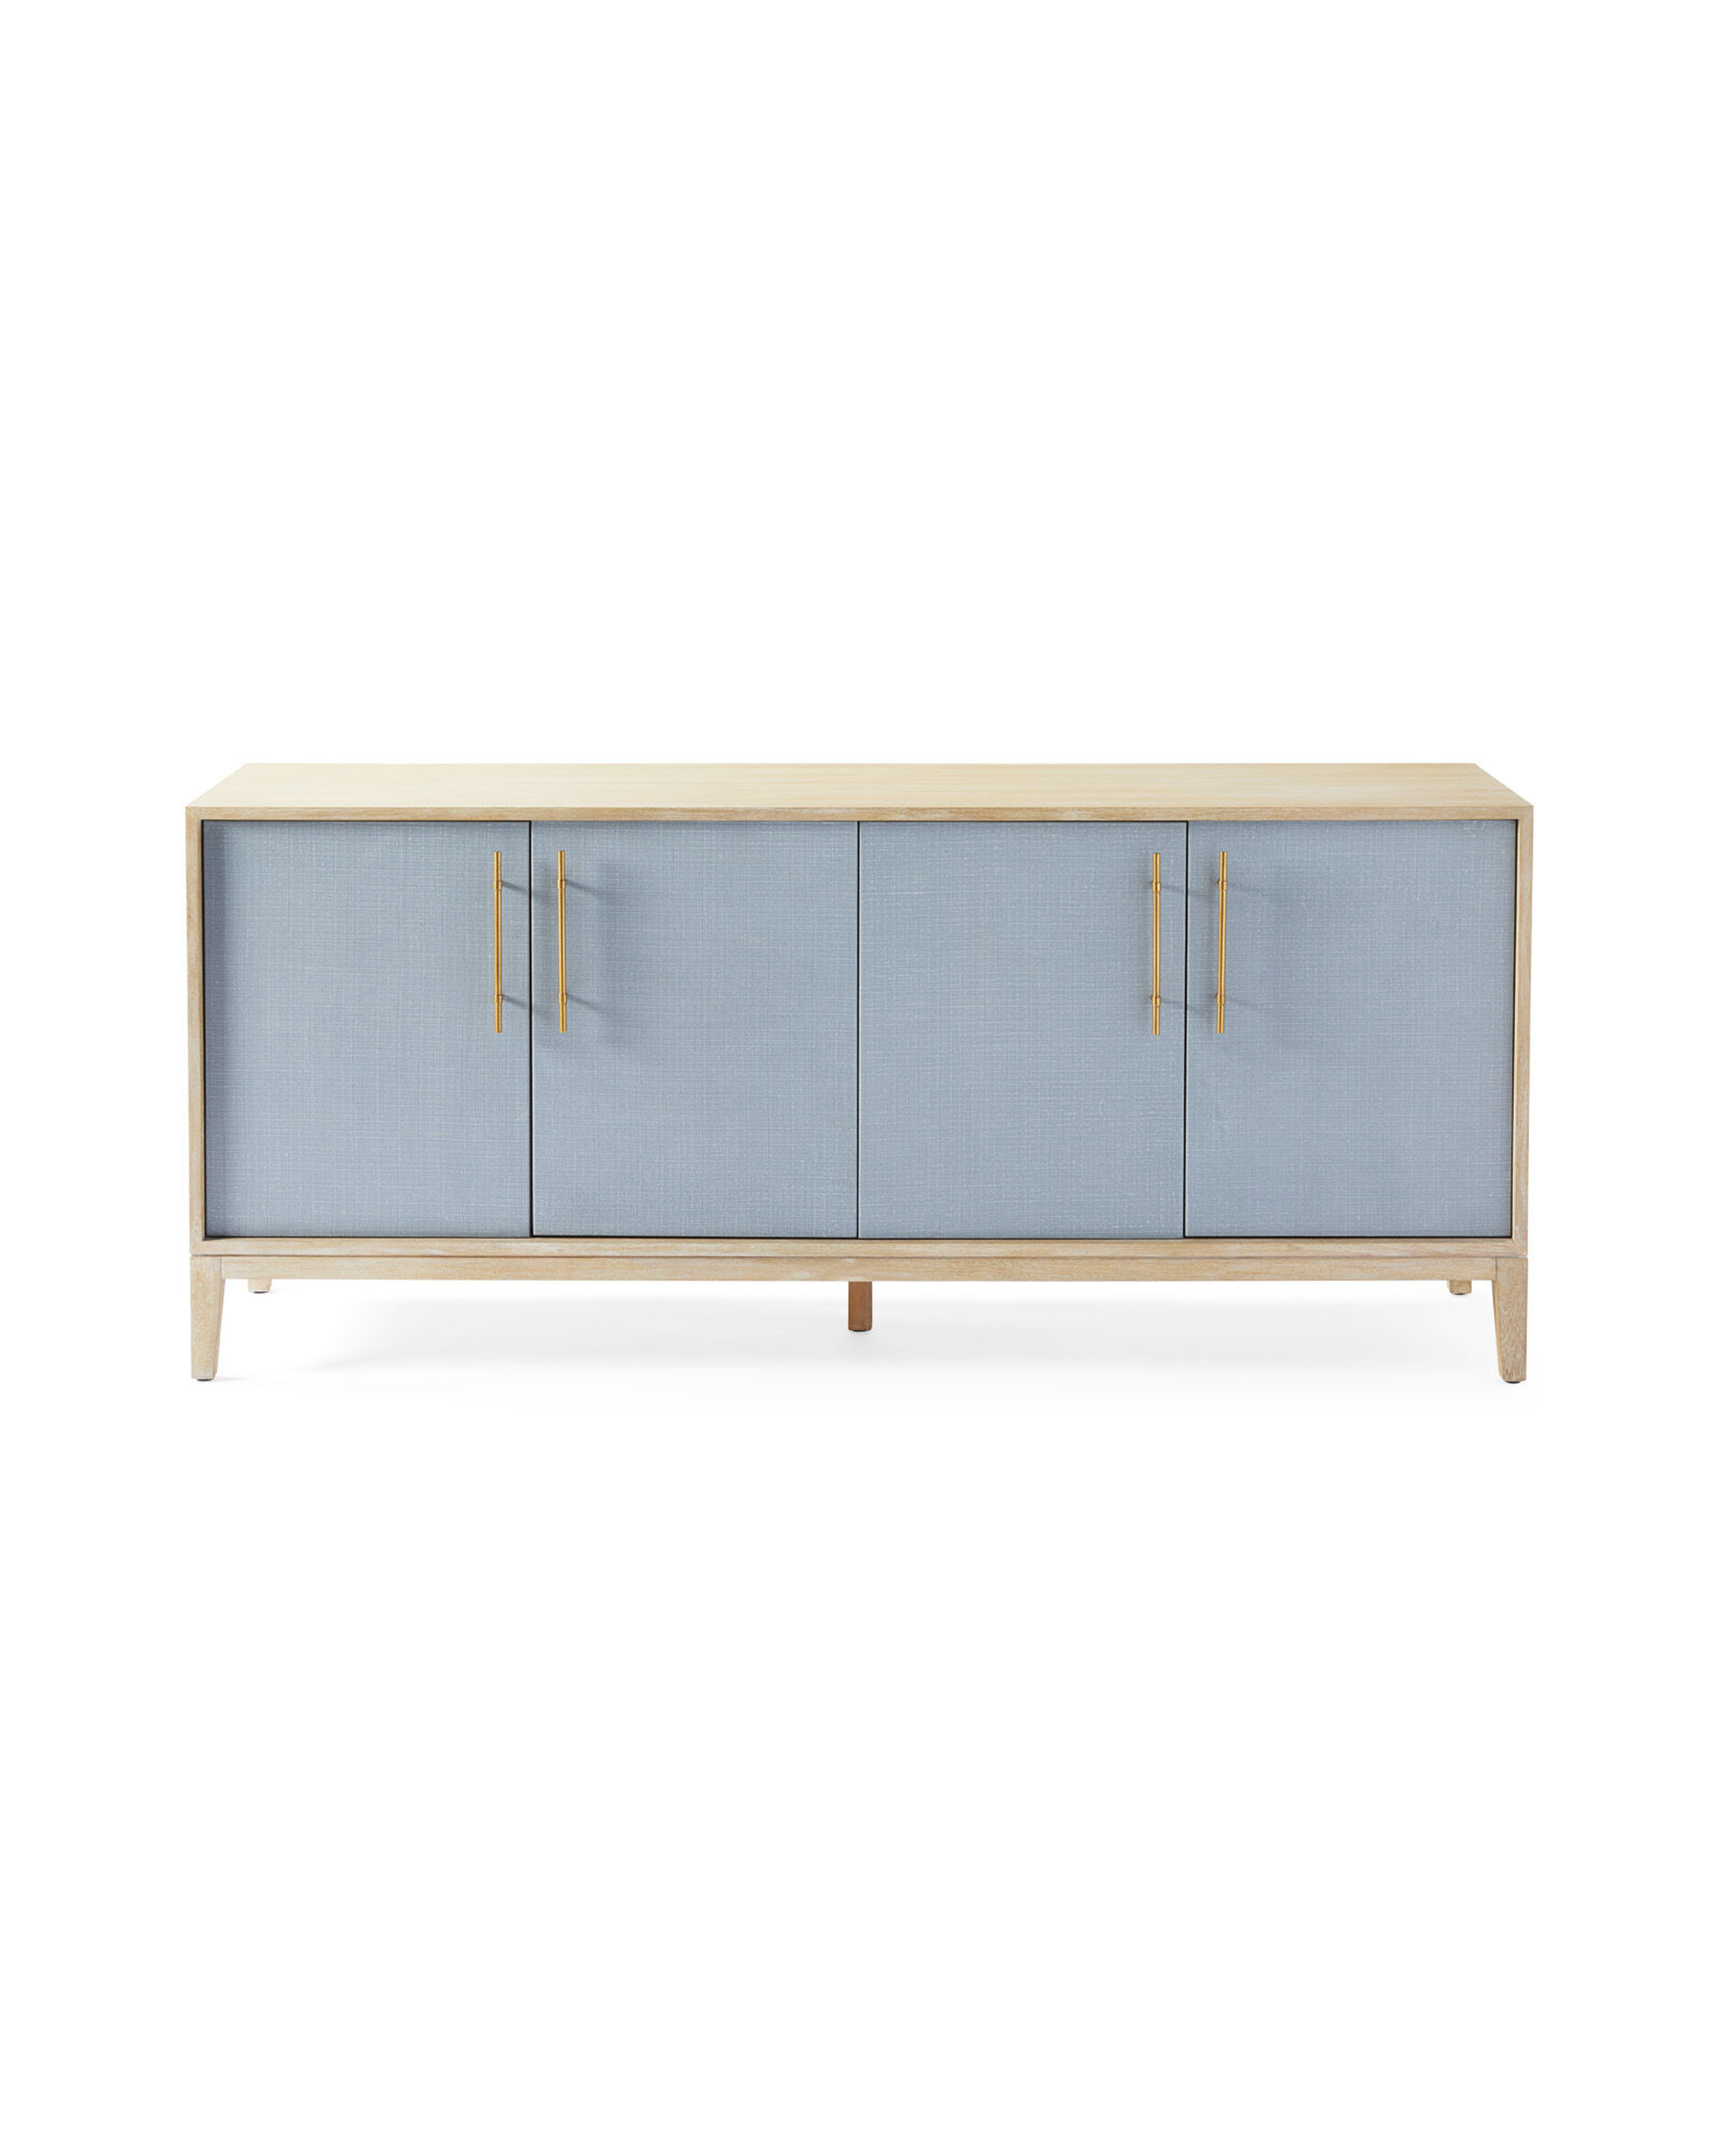 Wooster Console - Serena and Lily